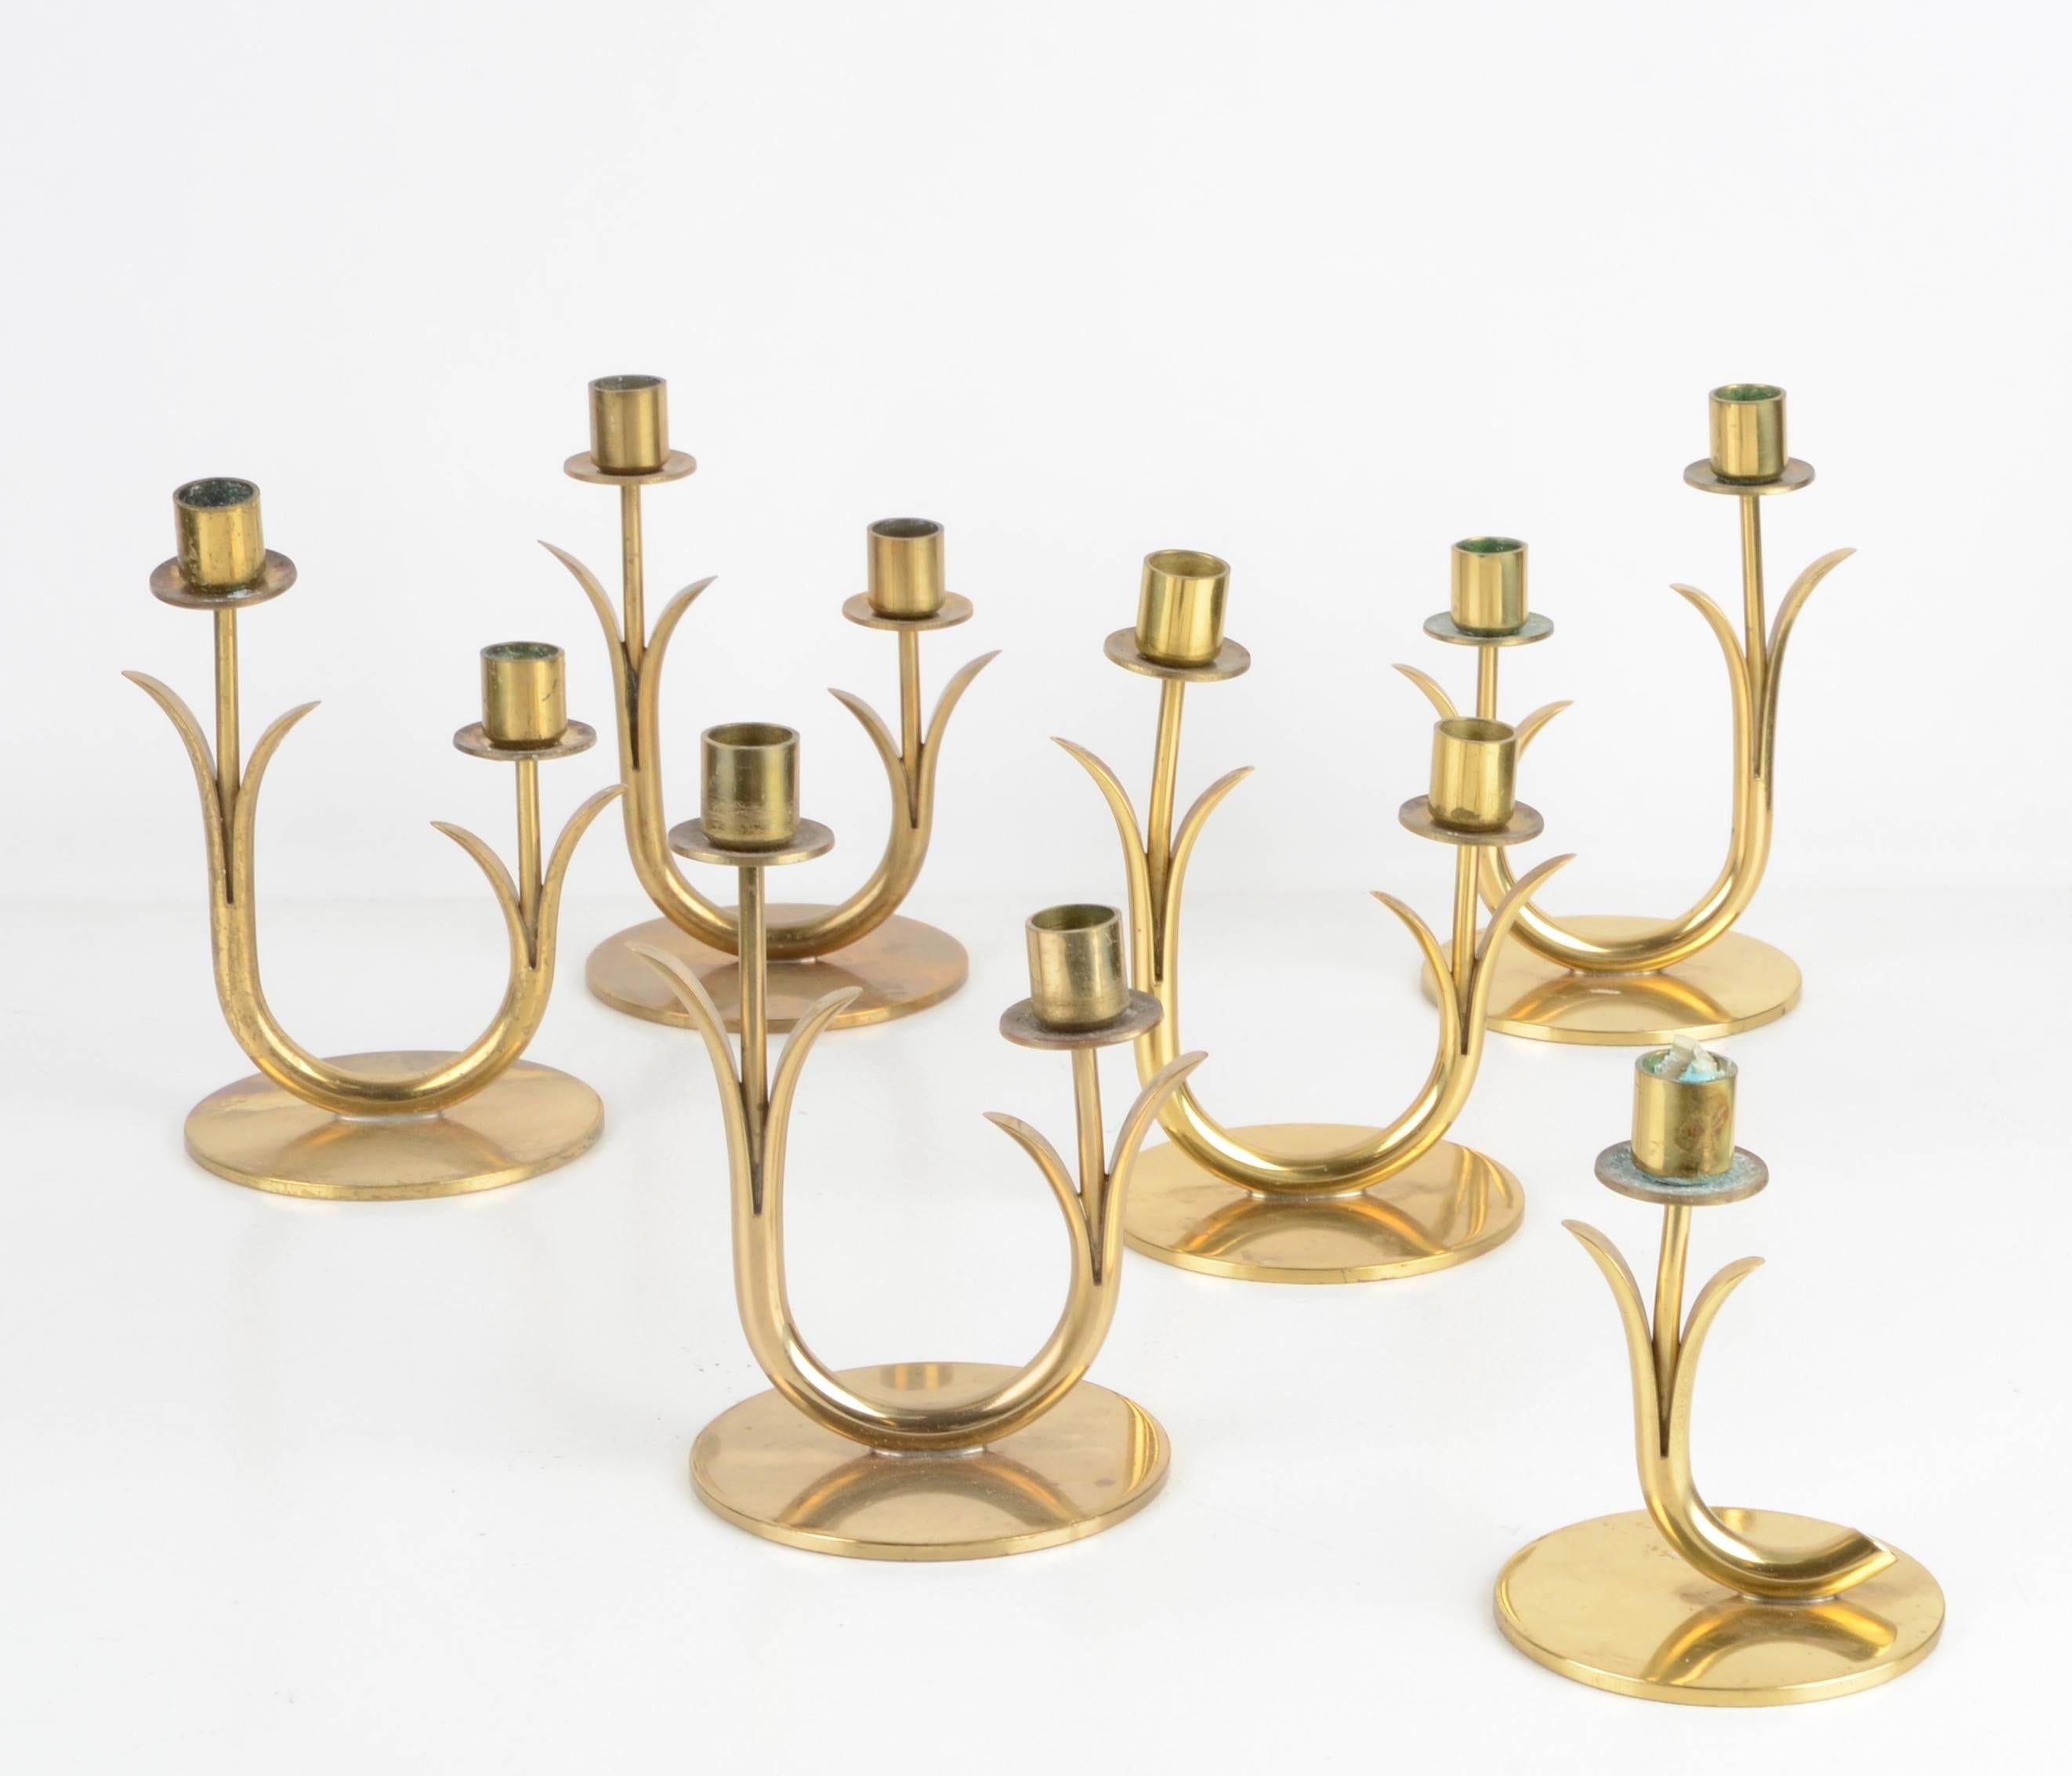 A set of six candleholders in brass, designed by Gunnar Ander for Ystad Metall, Sweden, mid-1900s.